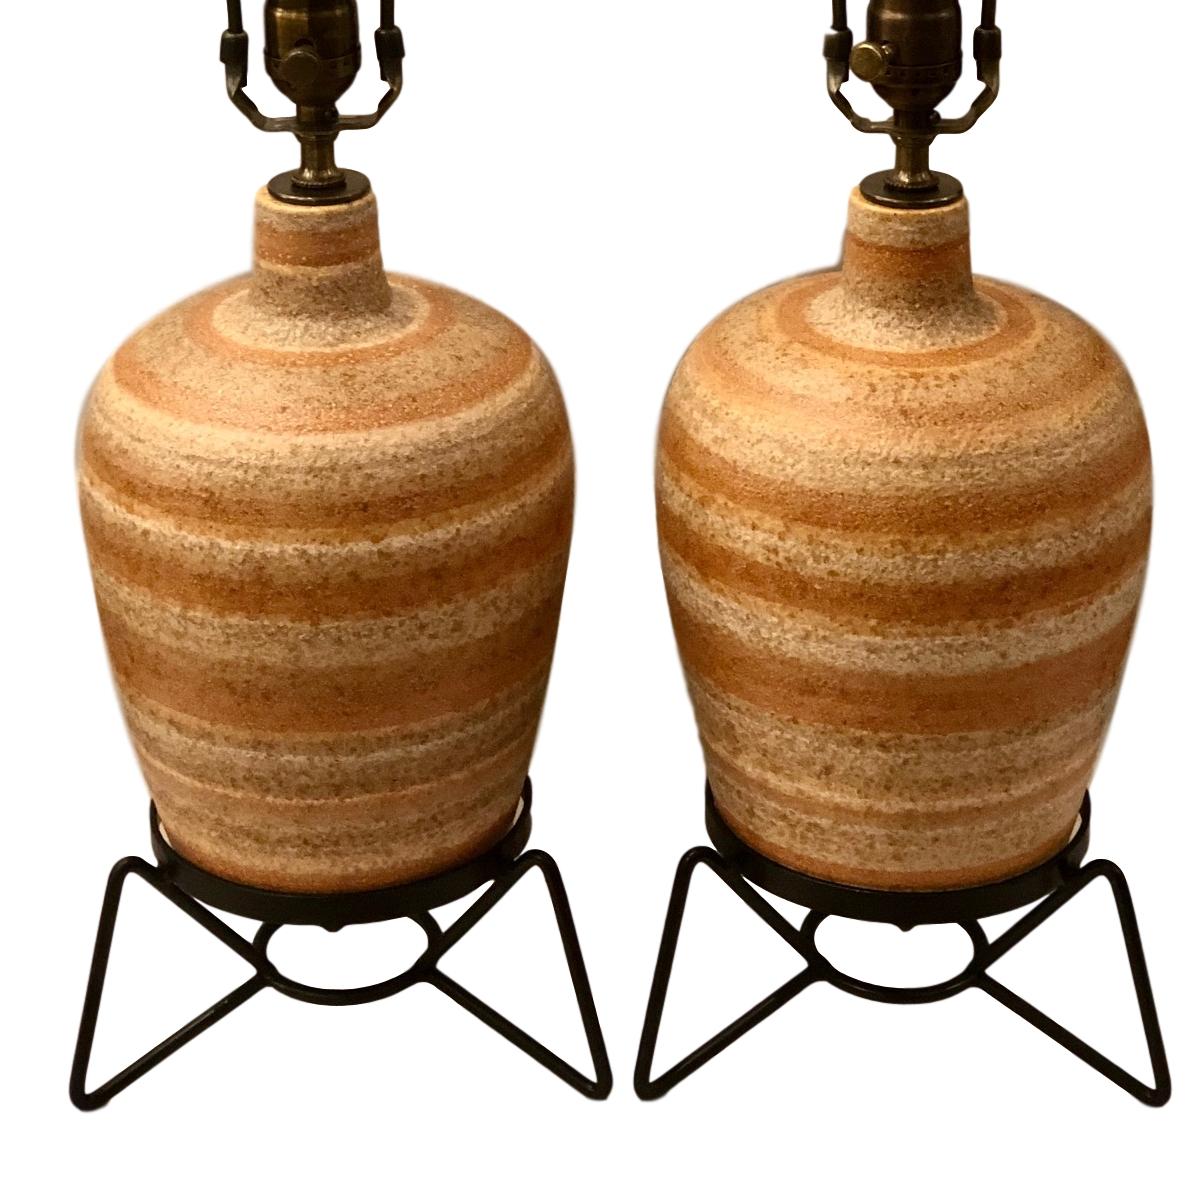 A pair of Italian circa 1950s ceramic table lamps with iron bases.

Measurements:
Height of body 15